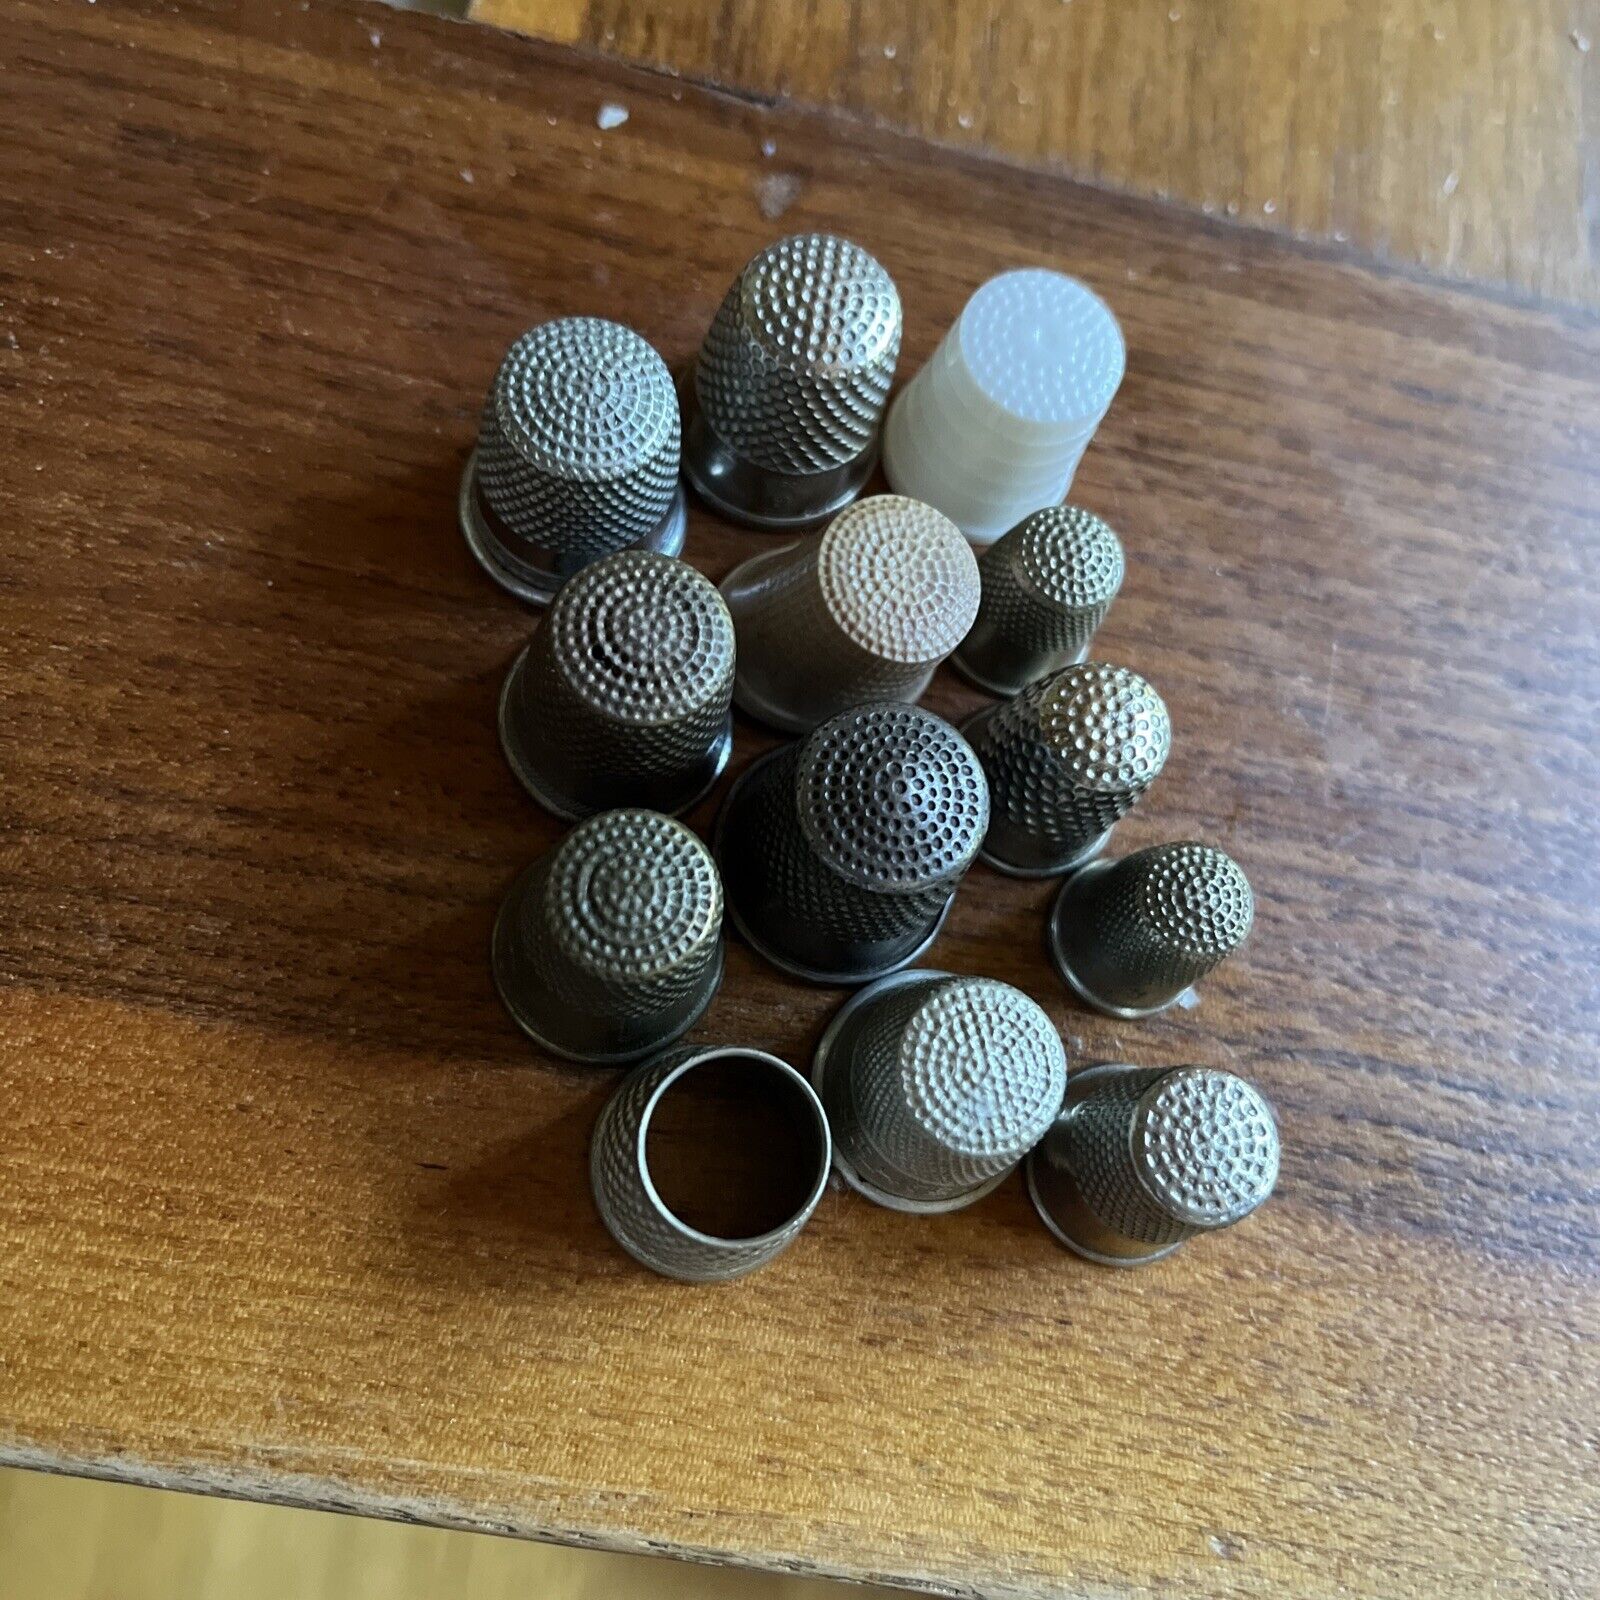 Antique or Vintage SEWING THIMBLES - lot of 13 plastic and metal